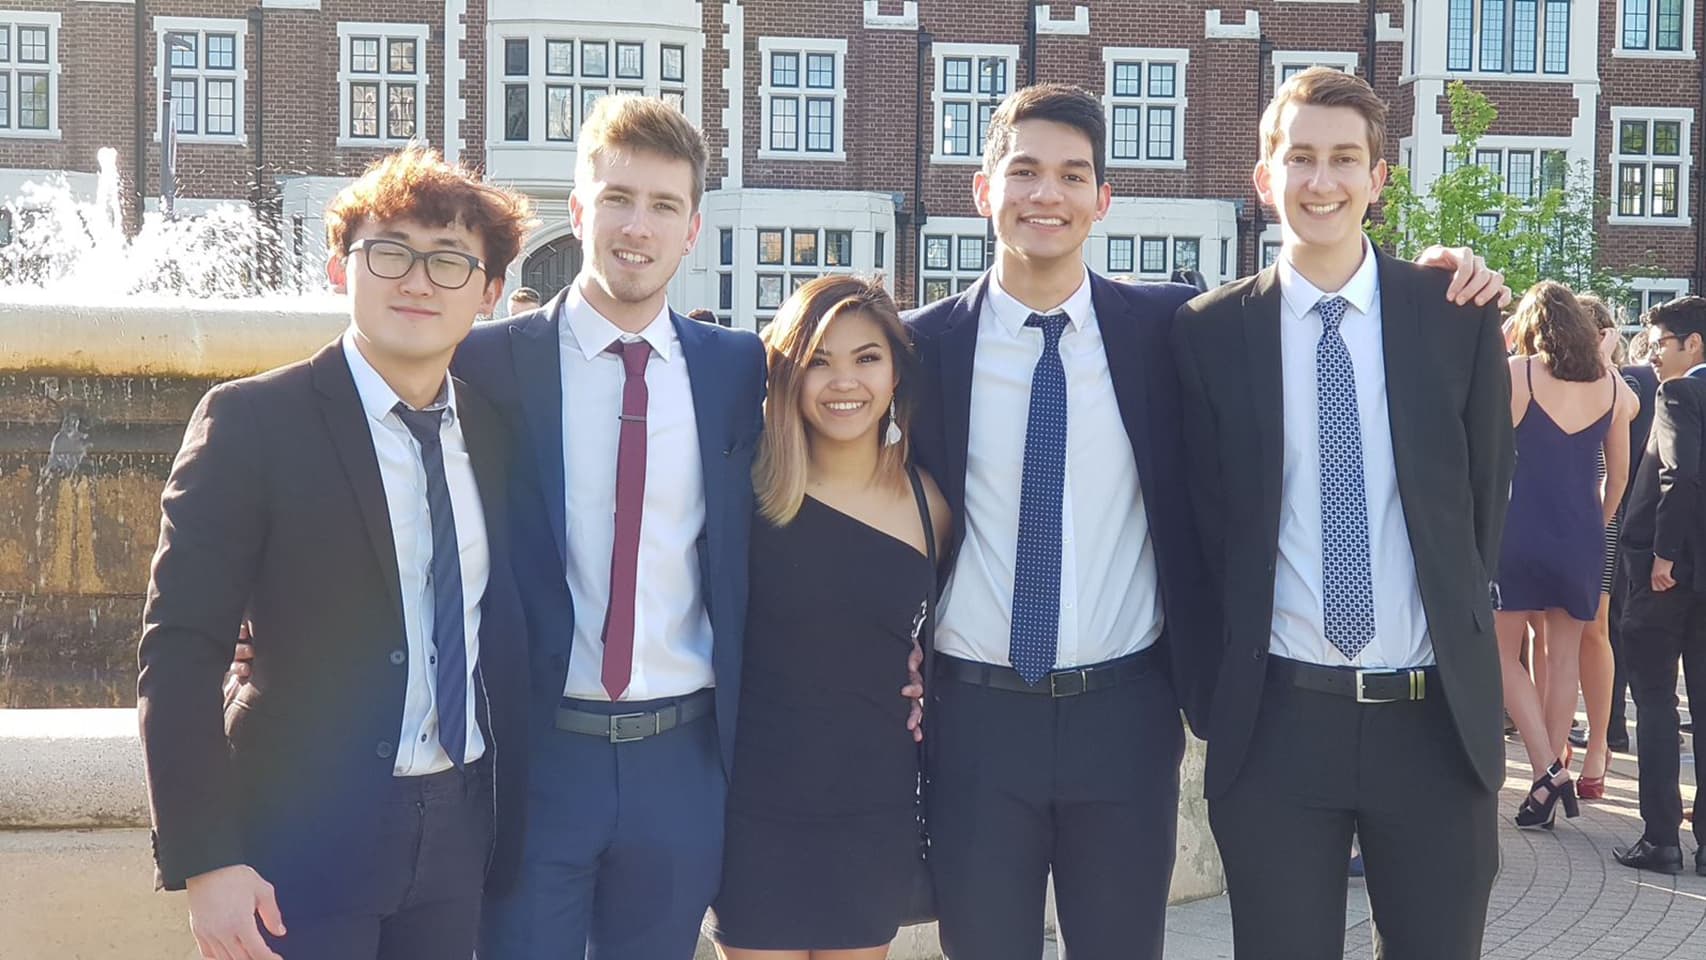 jack with friends at graduation